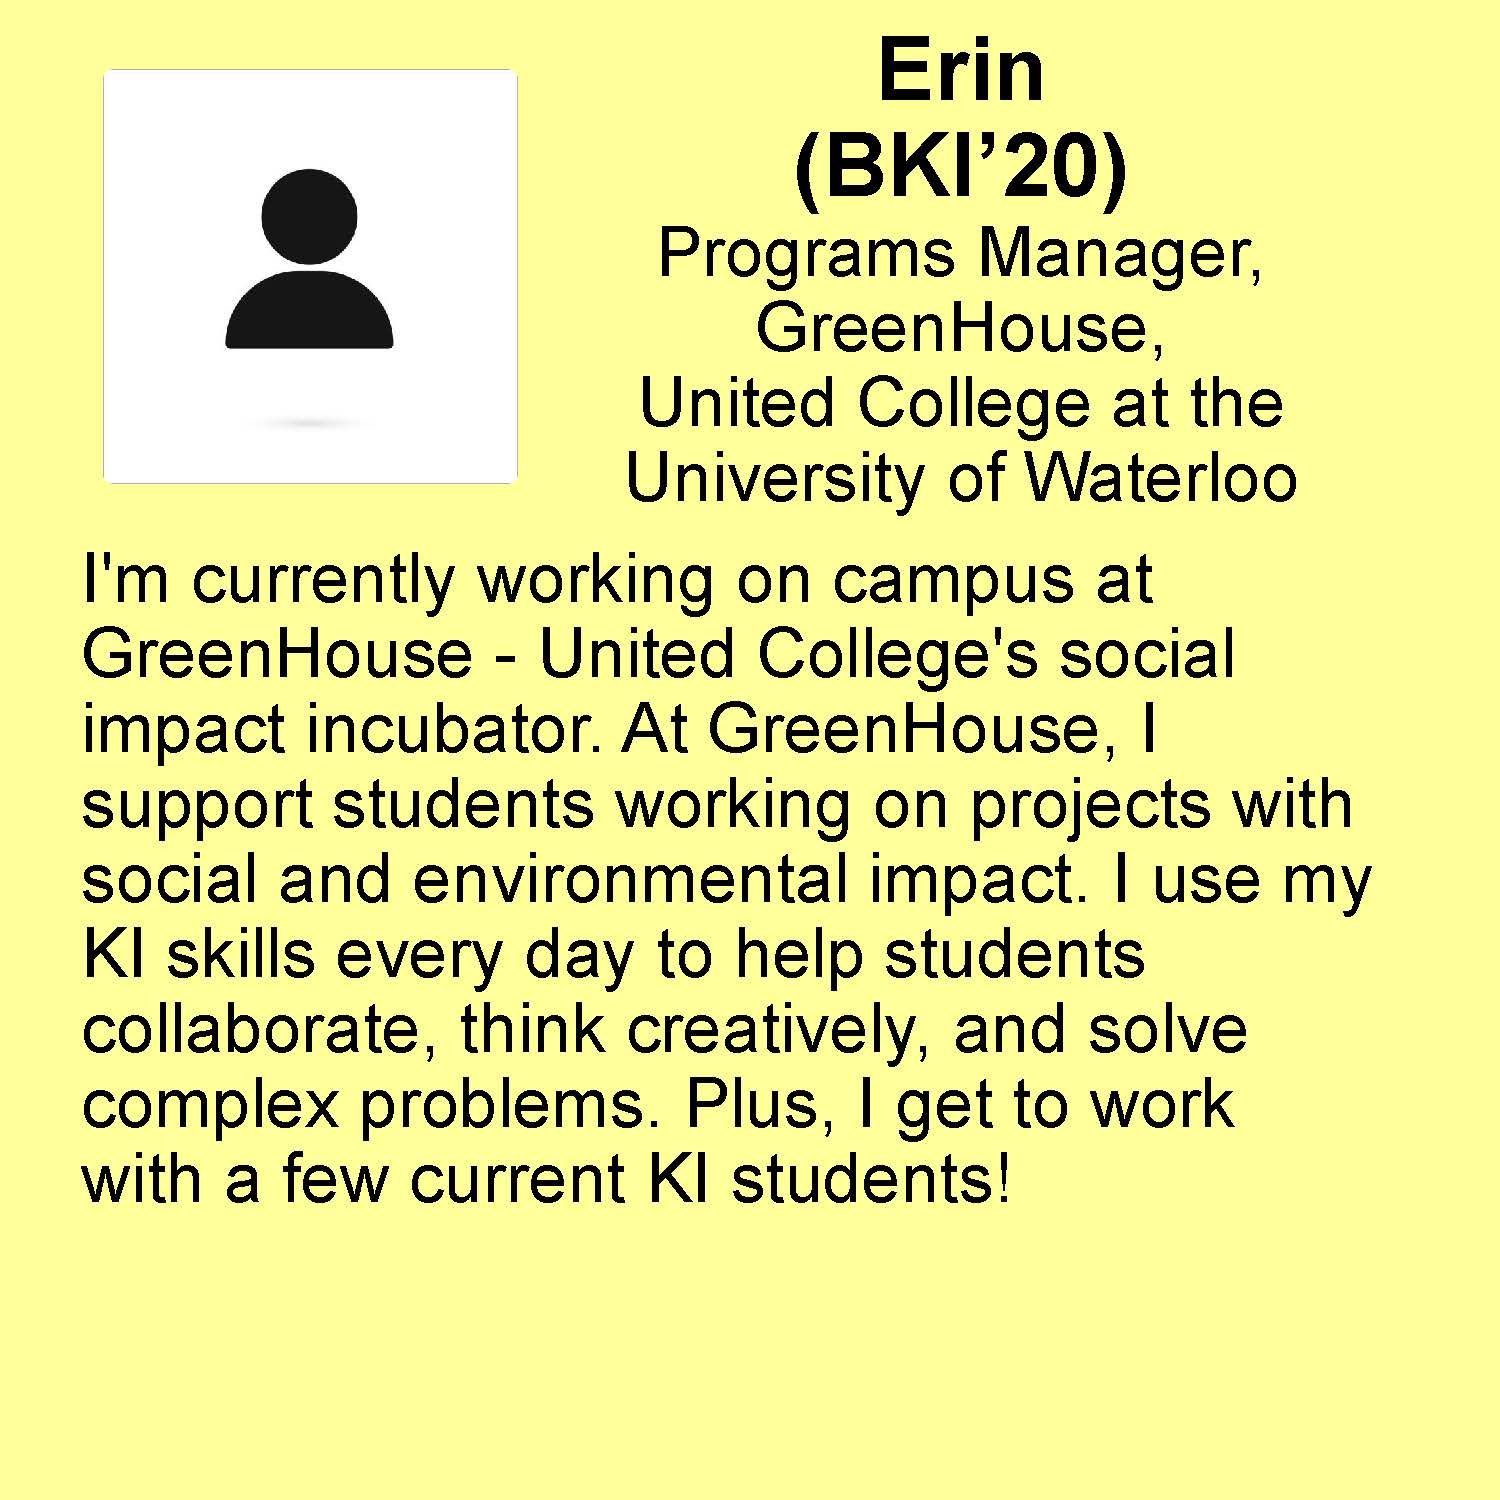 Erin profile  Programs Manager, GreenHouse, United College at the University of Waterloo